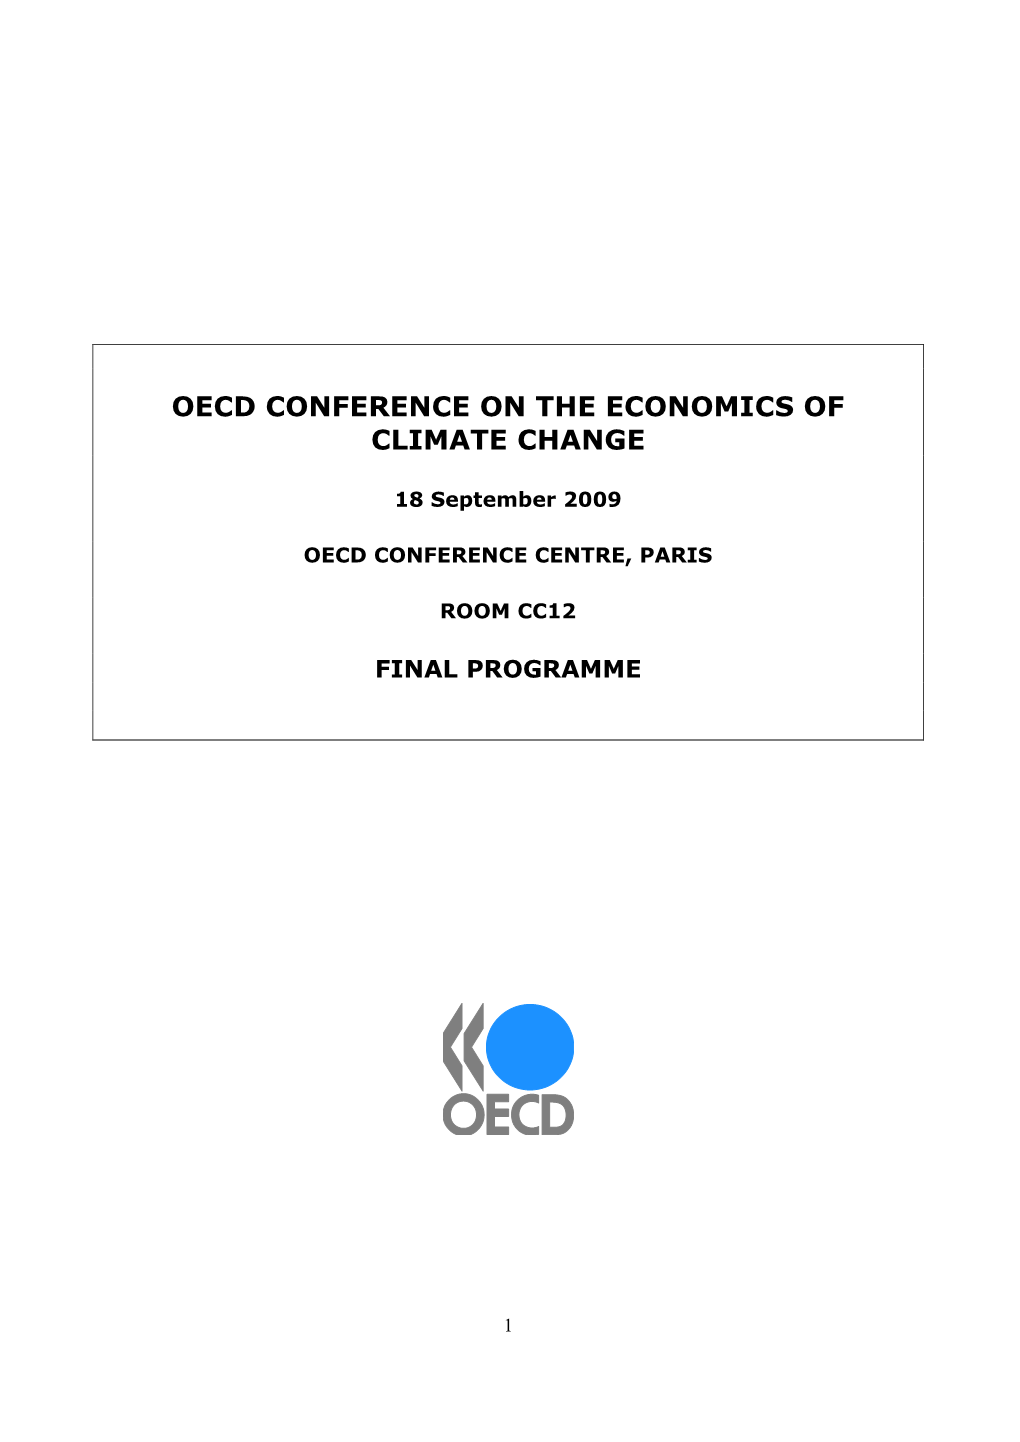 Oecd Conference on the Economics of Climate Change